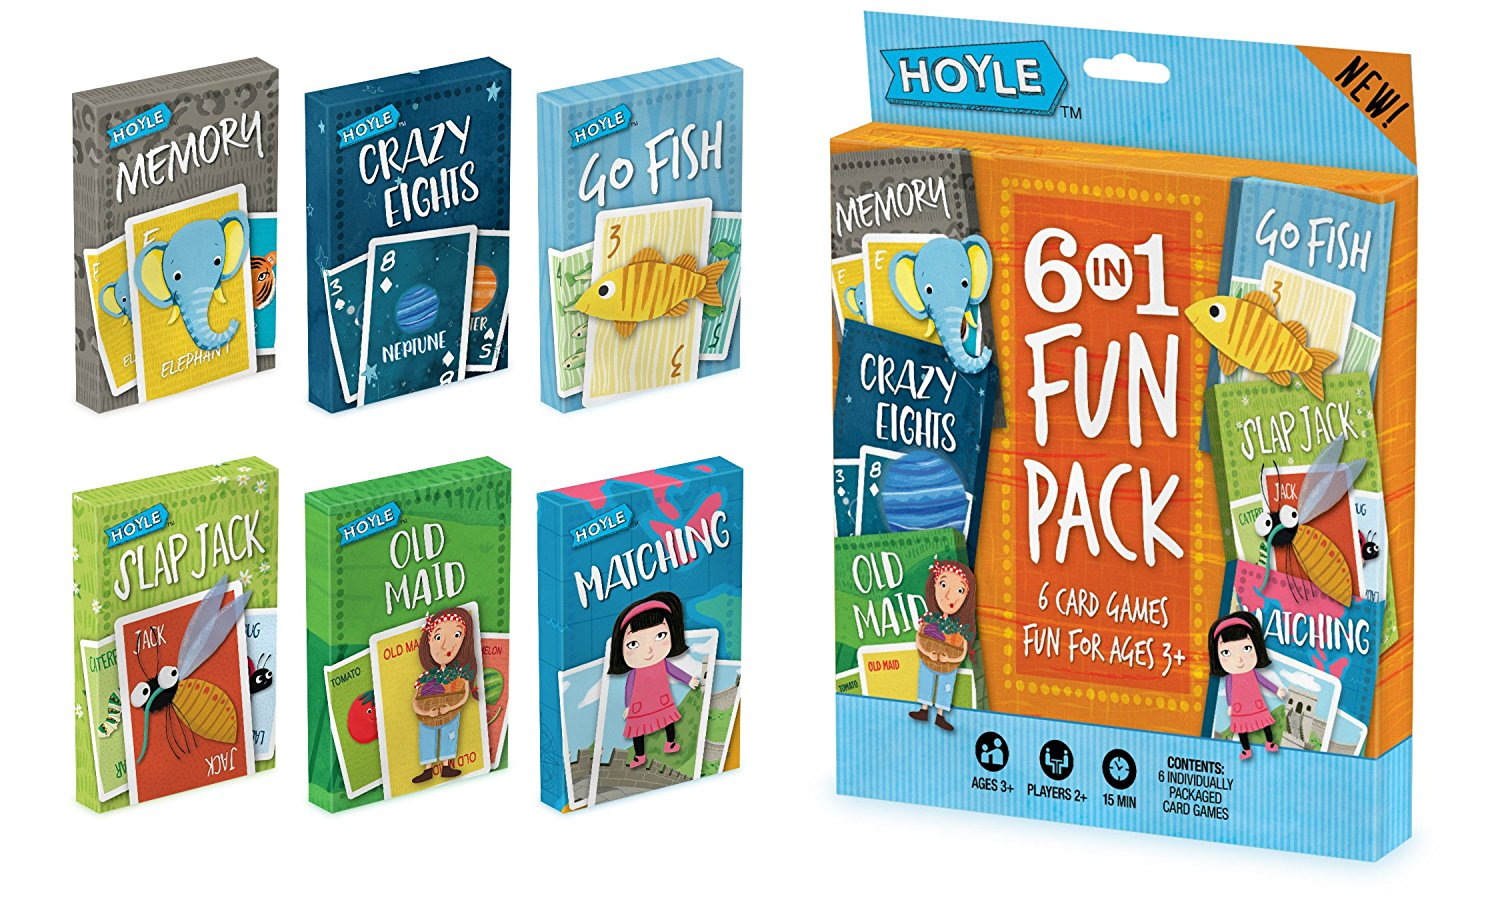 Amazon – Hoyle Kid’s 6 in 1 Fun Pack Card Games for just .99!